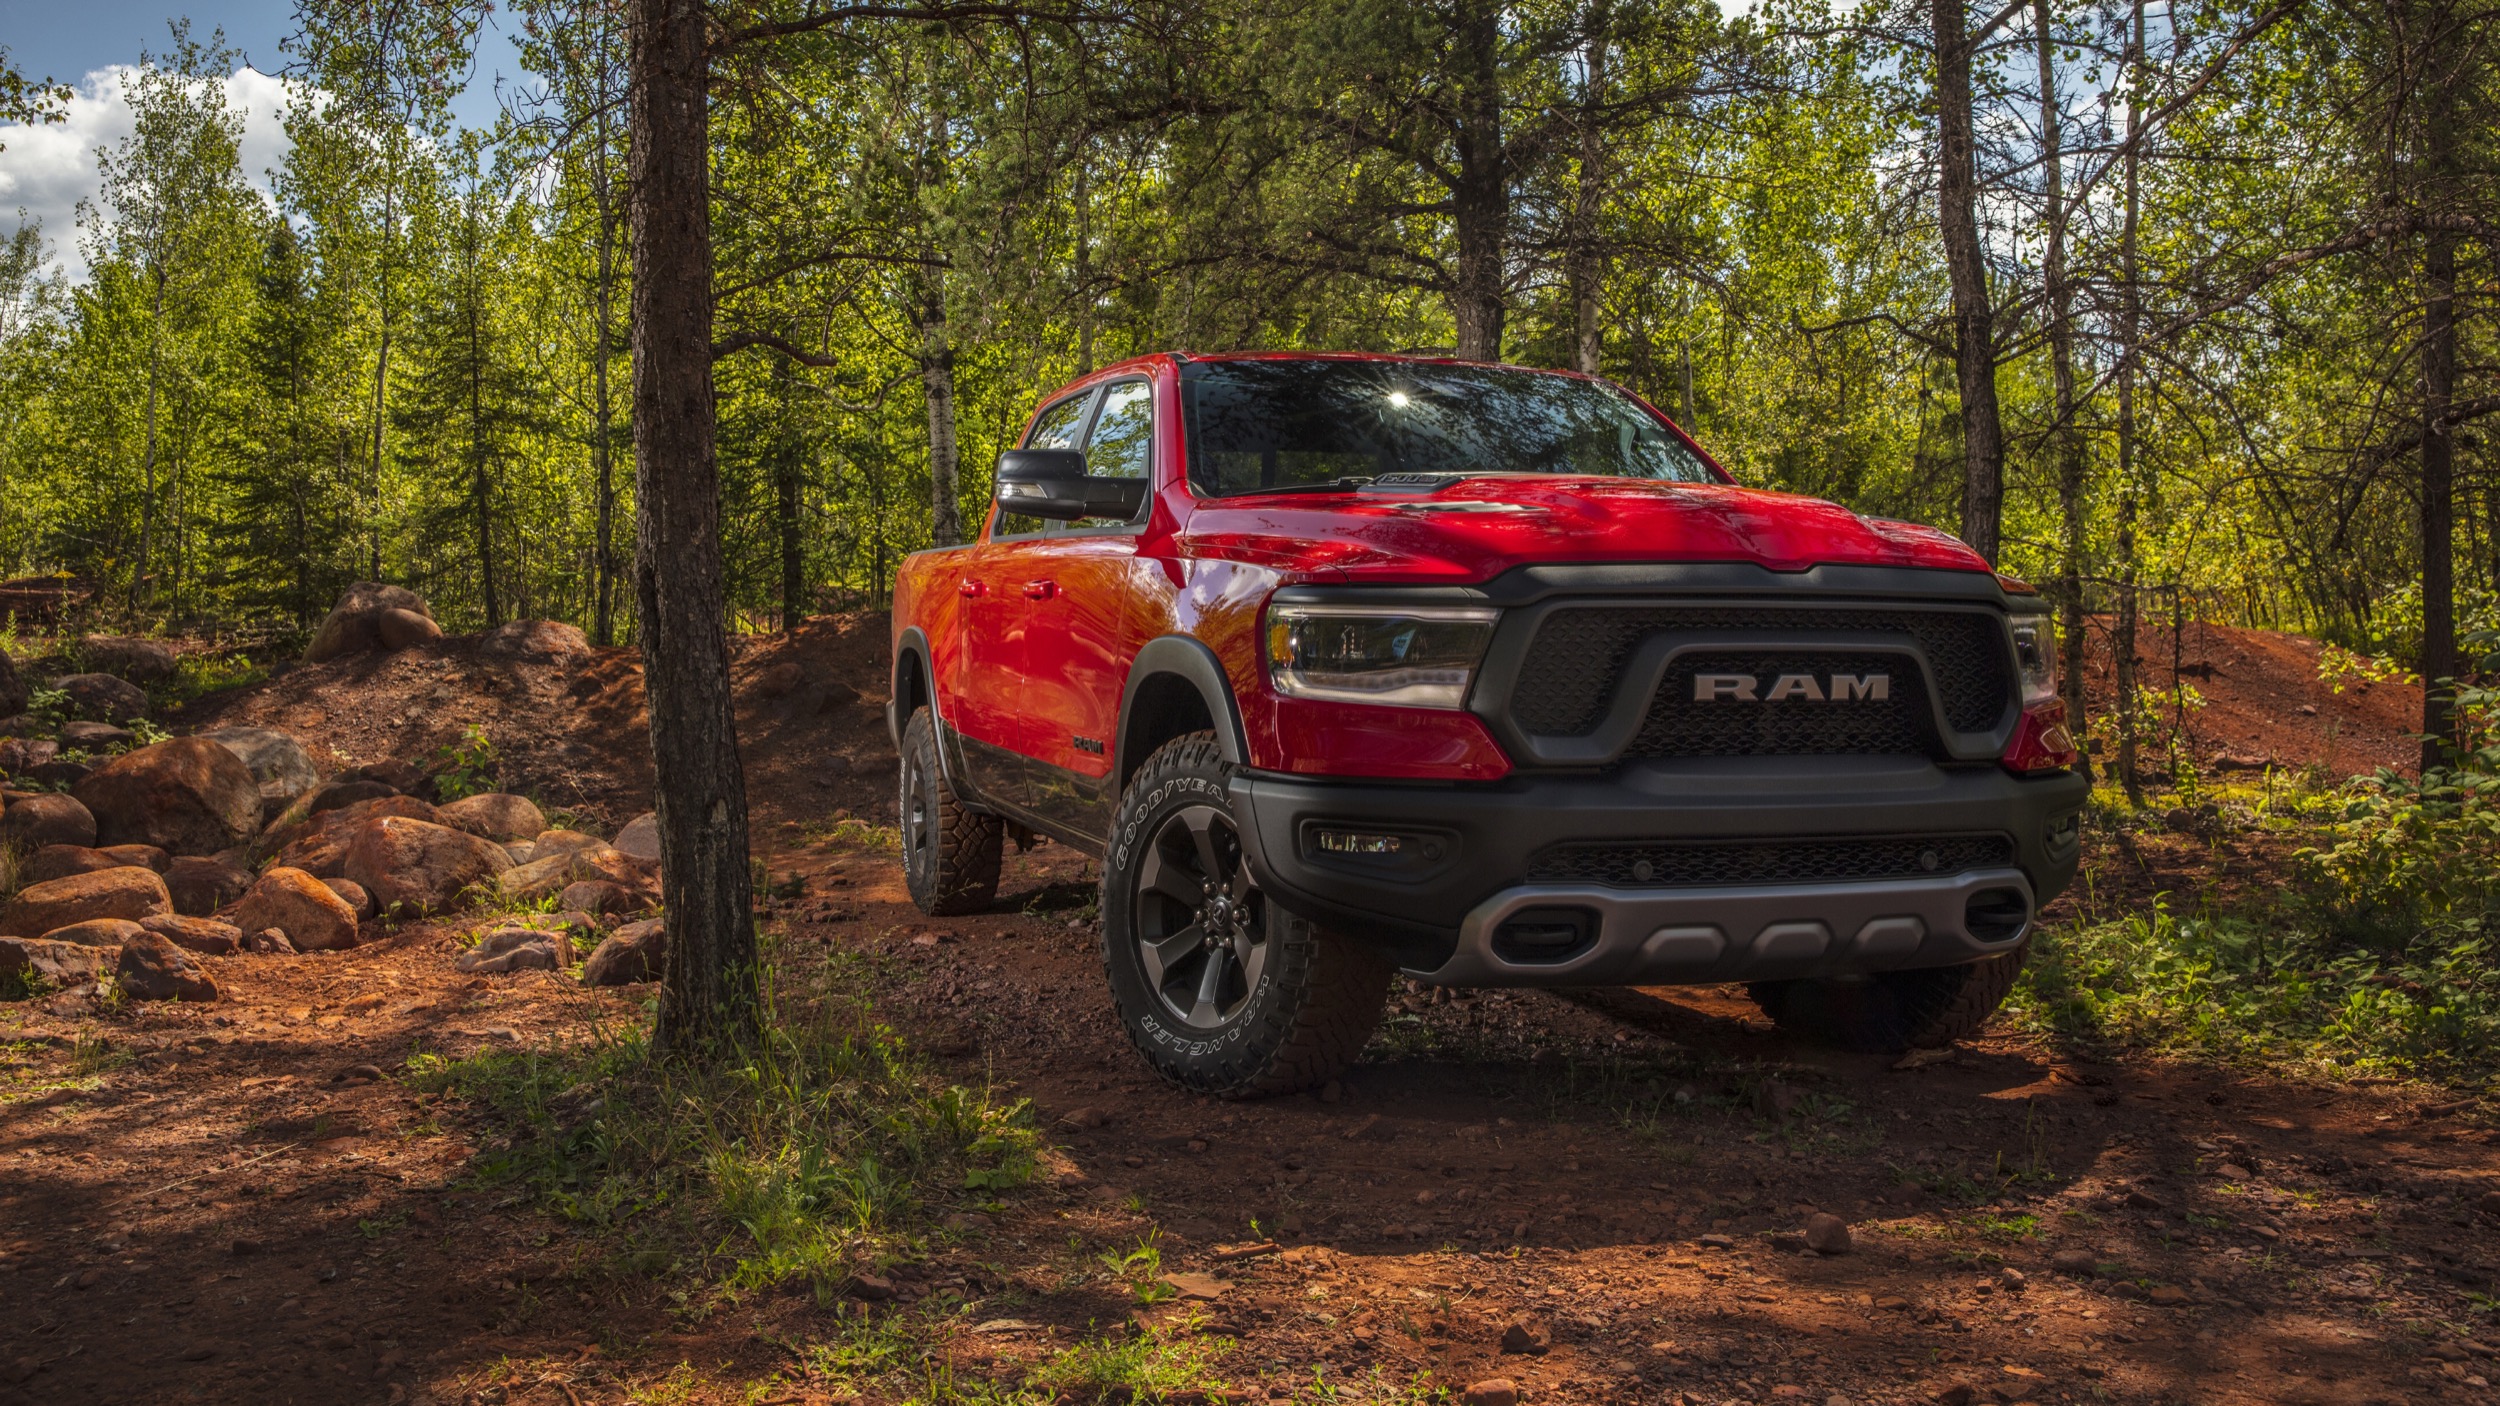 2020 Ram 1500 EcoDiesel First Drive | What's new, fuel economy ...